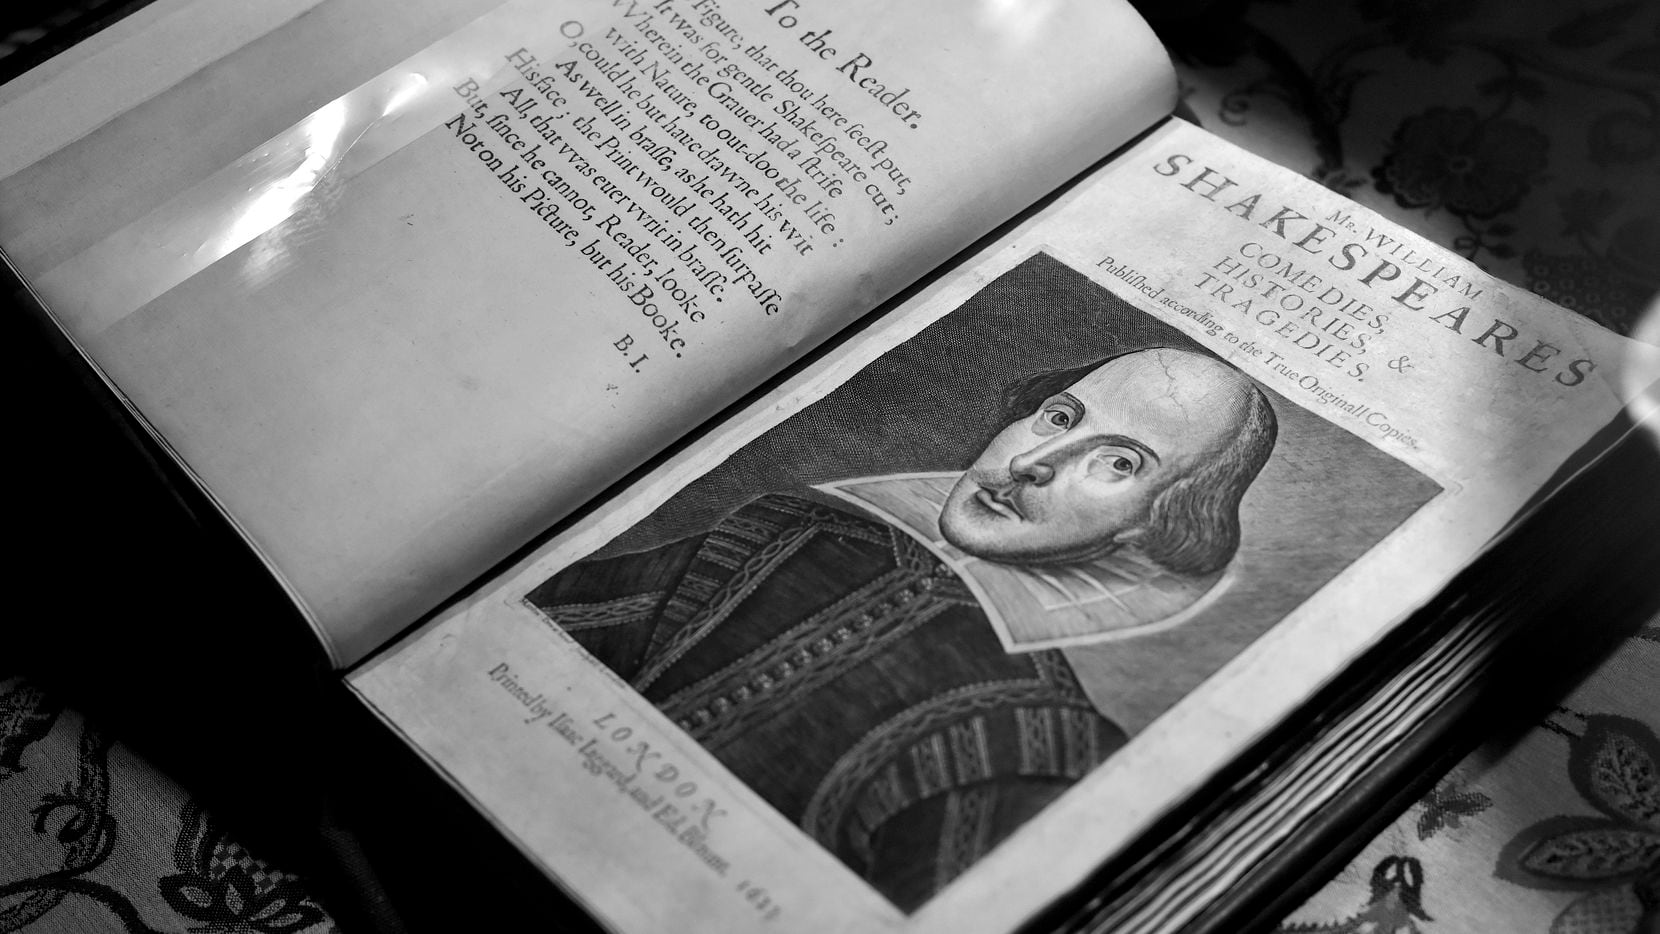 William Shakespeare's 'Comedies, Histories and Tragedies,' the first collected edition of his plays preserved, are on display at the Dallas Public Library downtown.